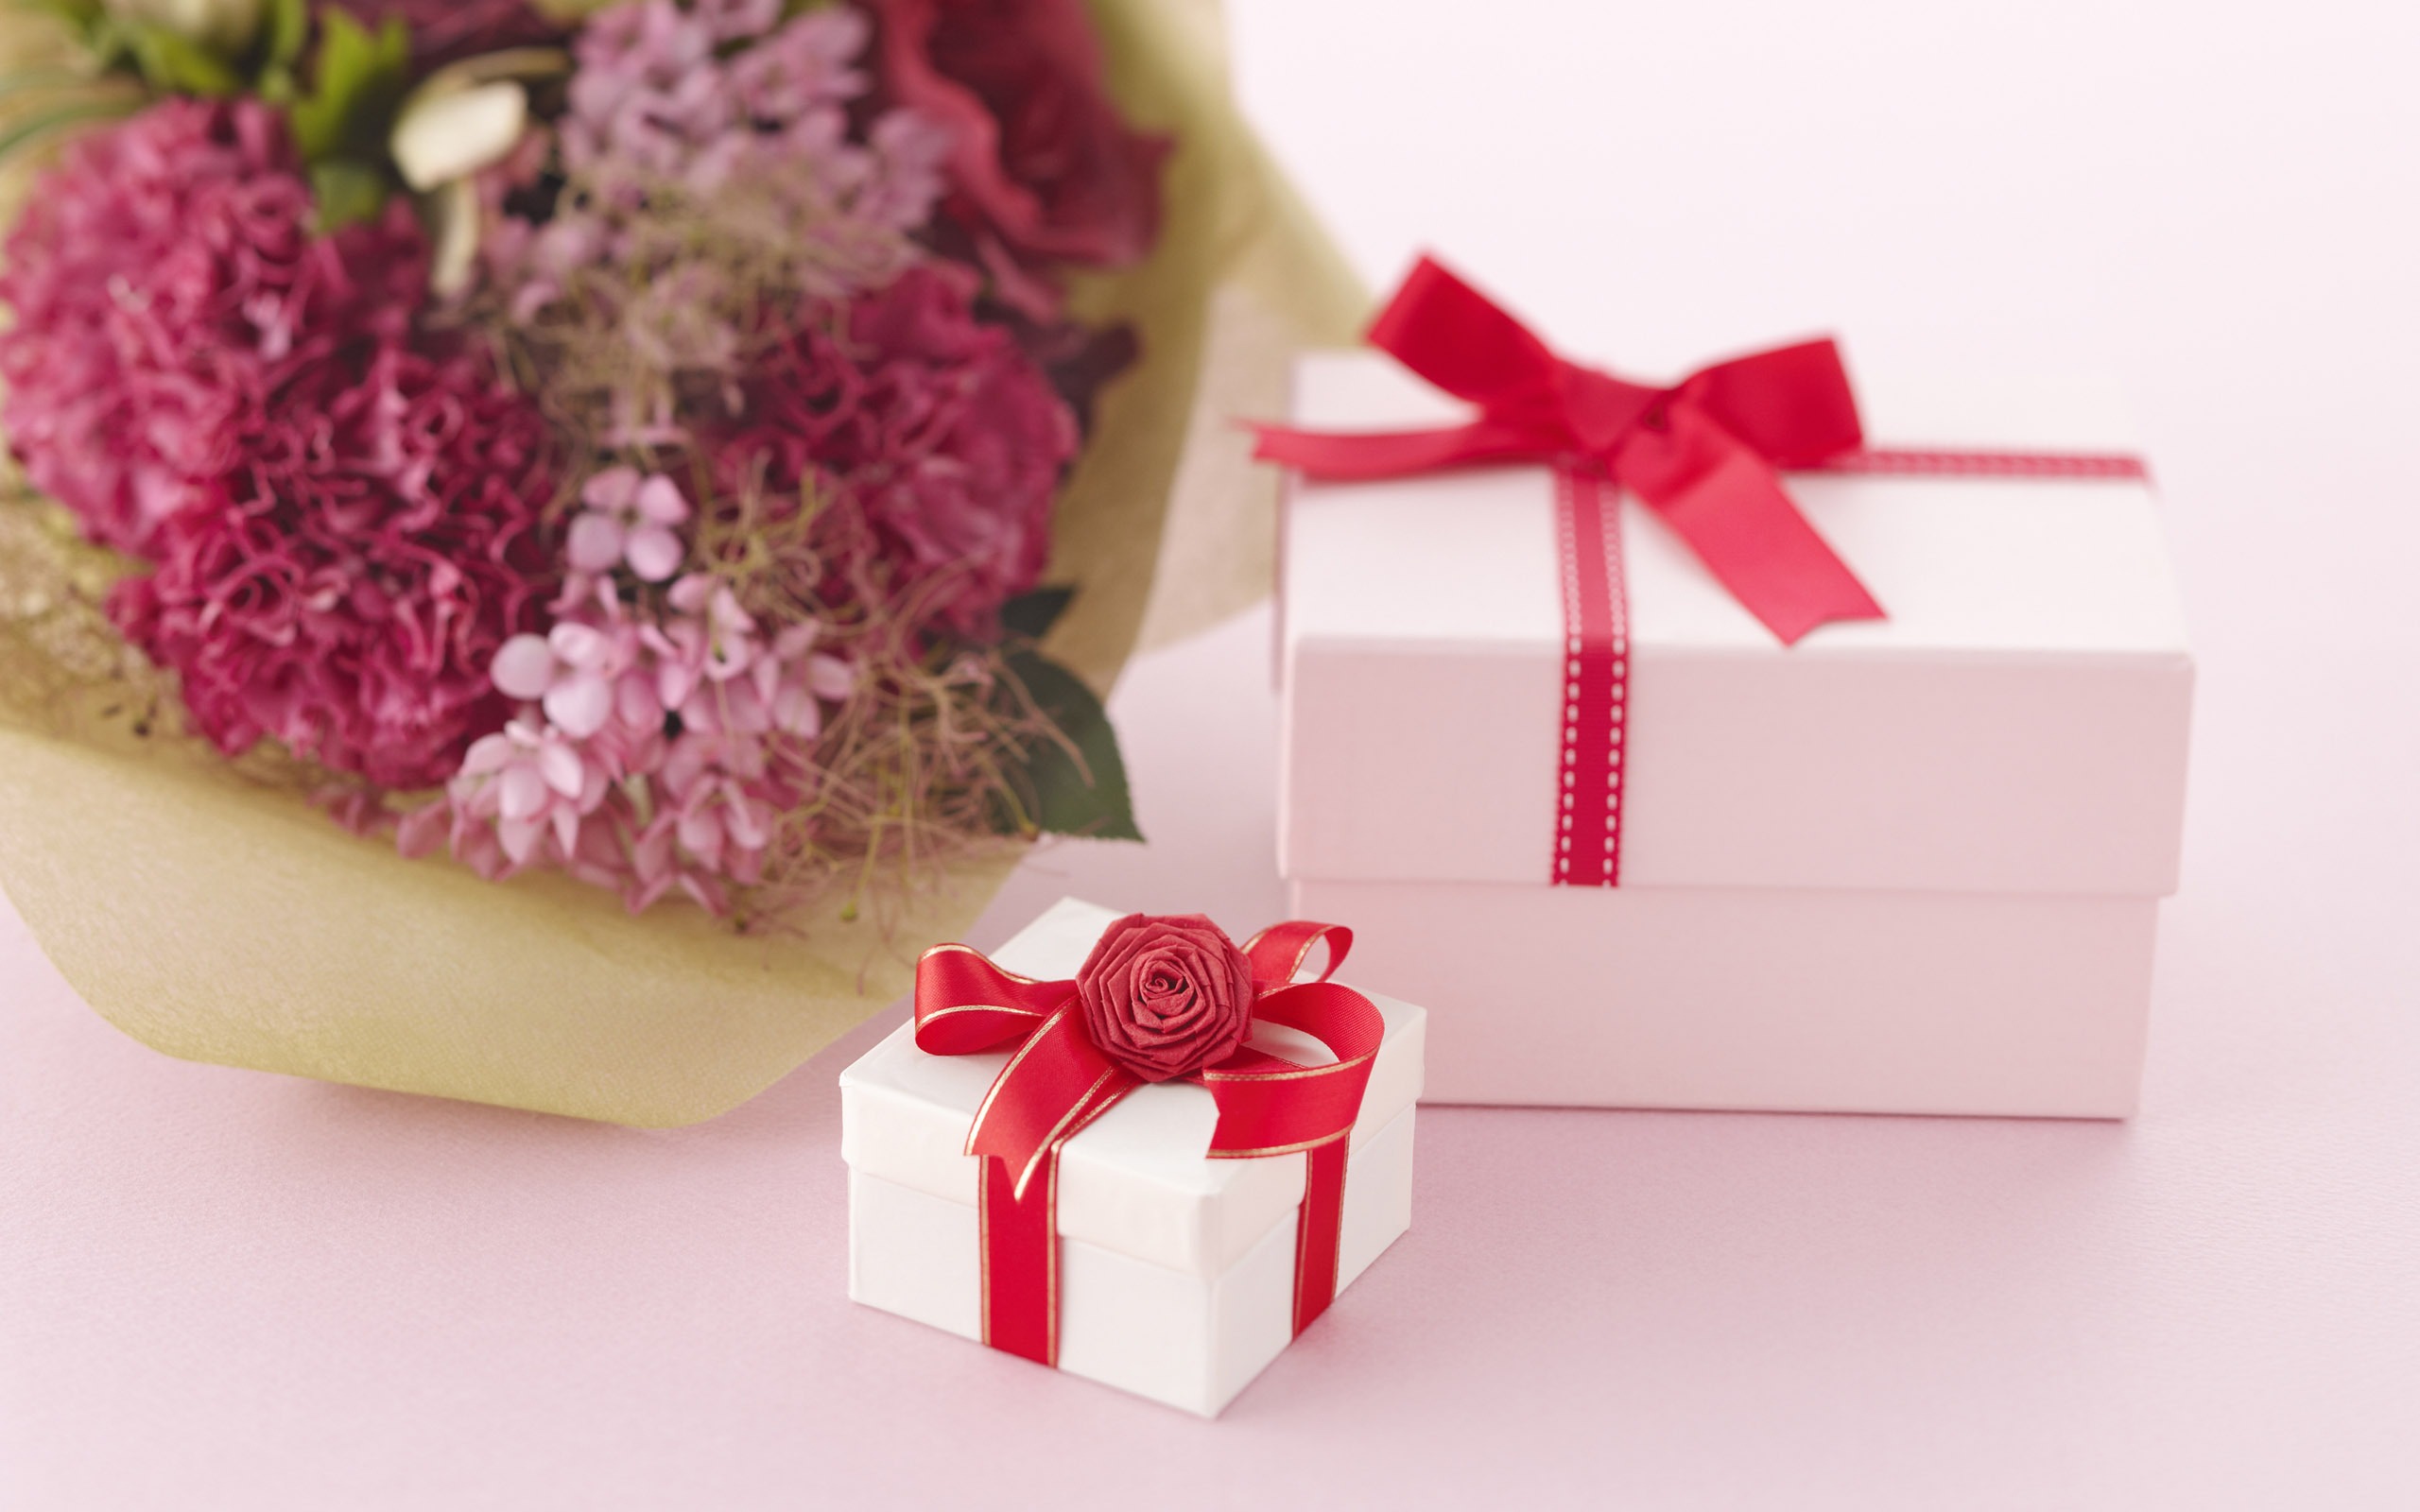 Flowers Gifts HD Wallpapers (1) #19 - 2560x1600